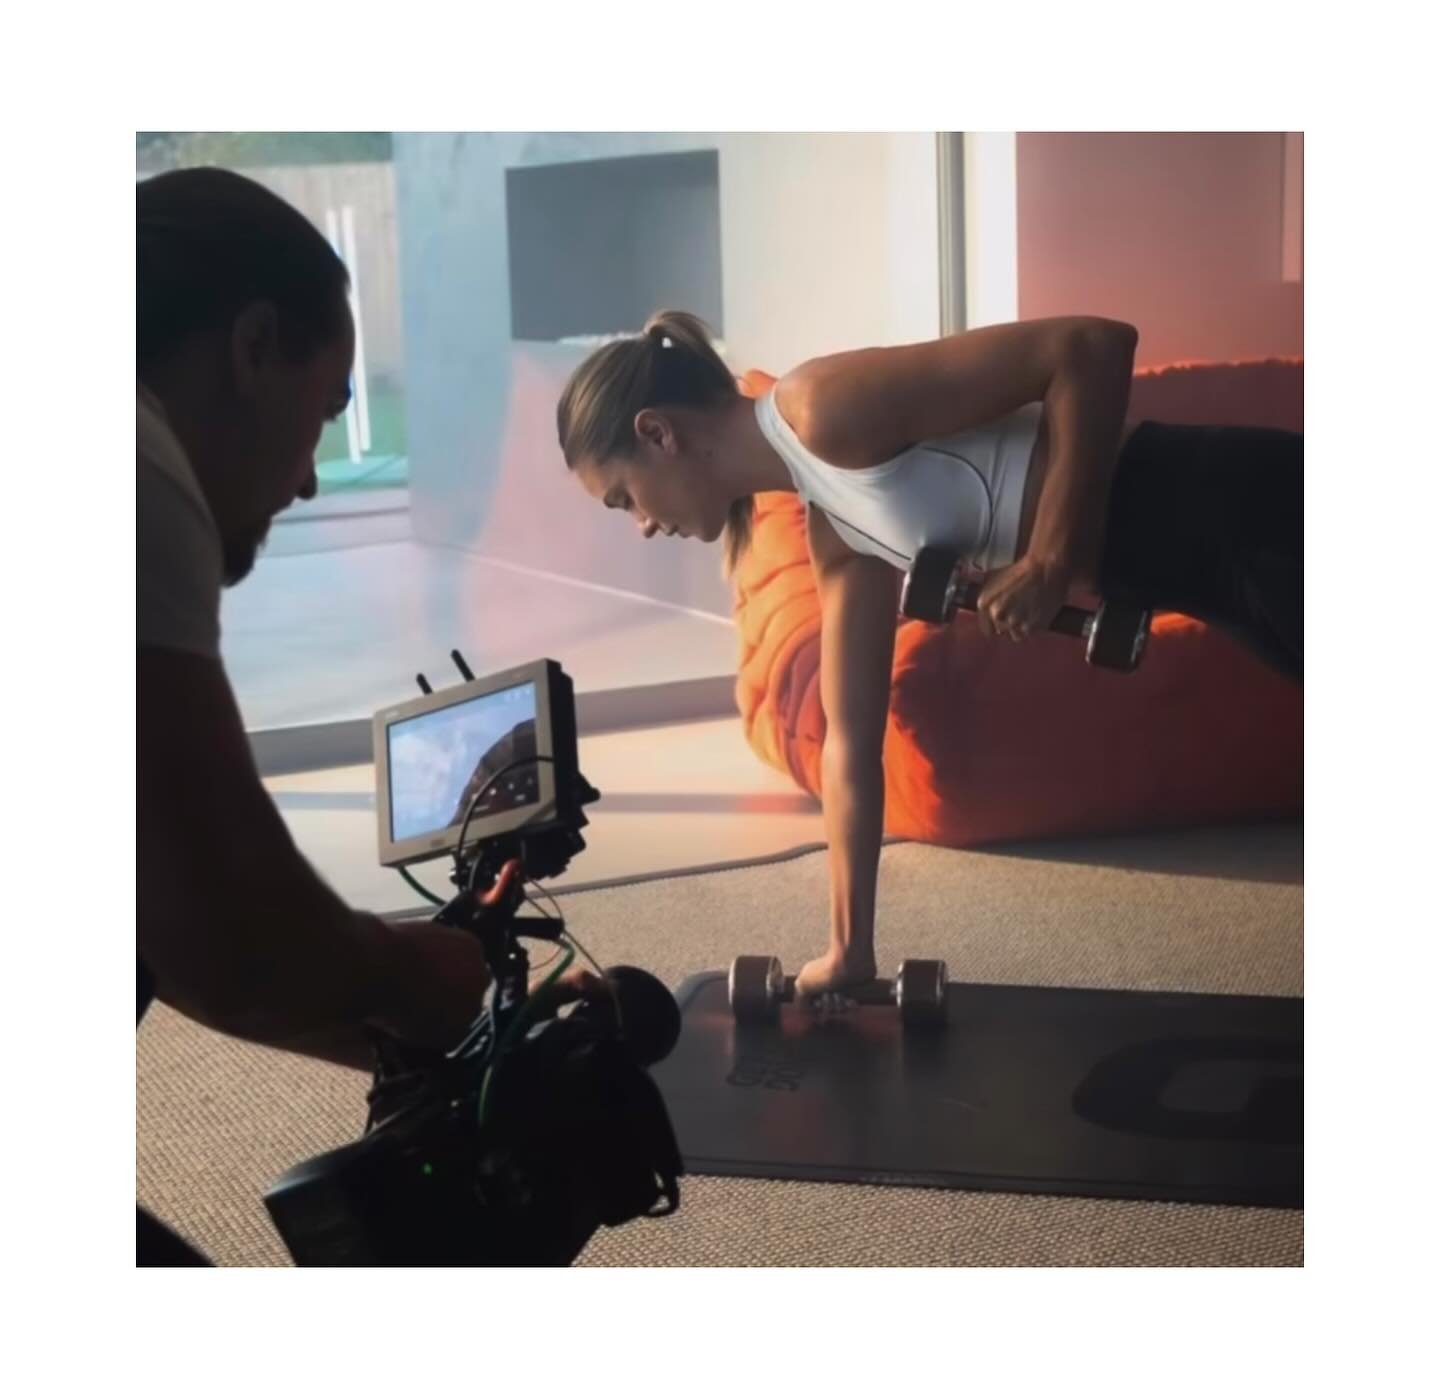 Behind the scenes with @bradleysimmonds and @getitdone. Relaunch campaign shot at @belairsurreyhills. 🏋🏻&zwj;♀️

Thank you to:
@social.punch 
@conniesimmonds 
@84world_ 
@lovelocations

📧Please get in touch with hello@locationcreation.co.uk for fi